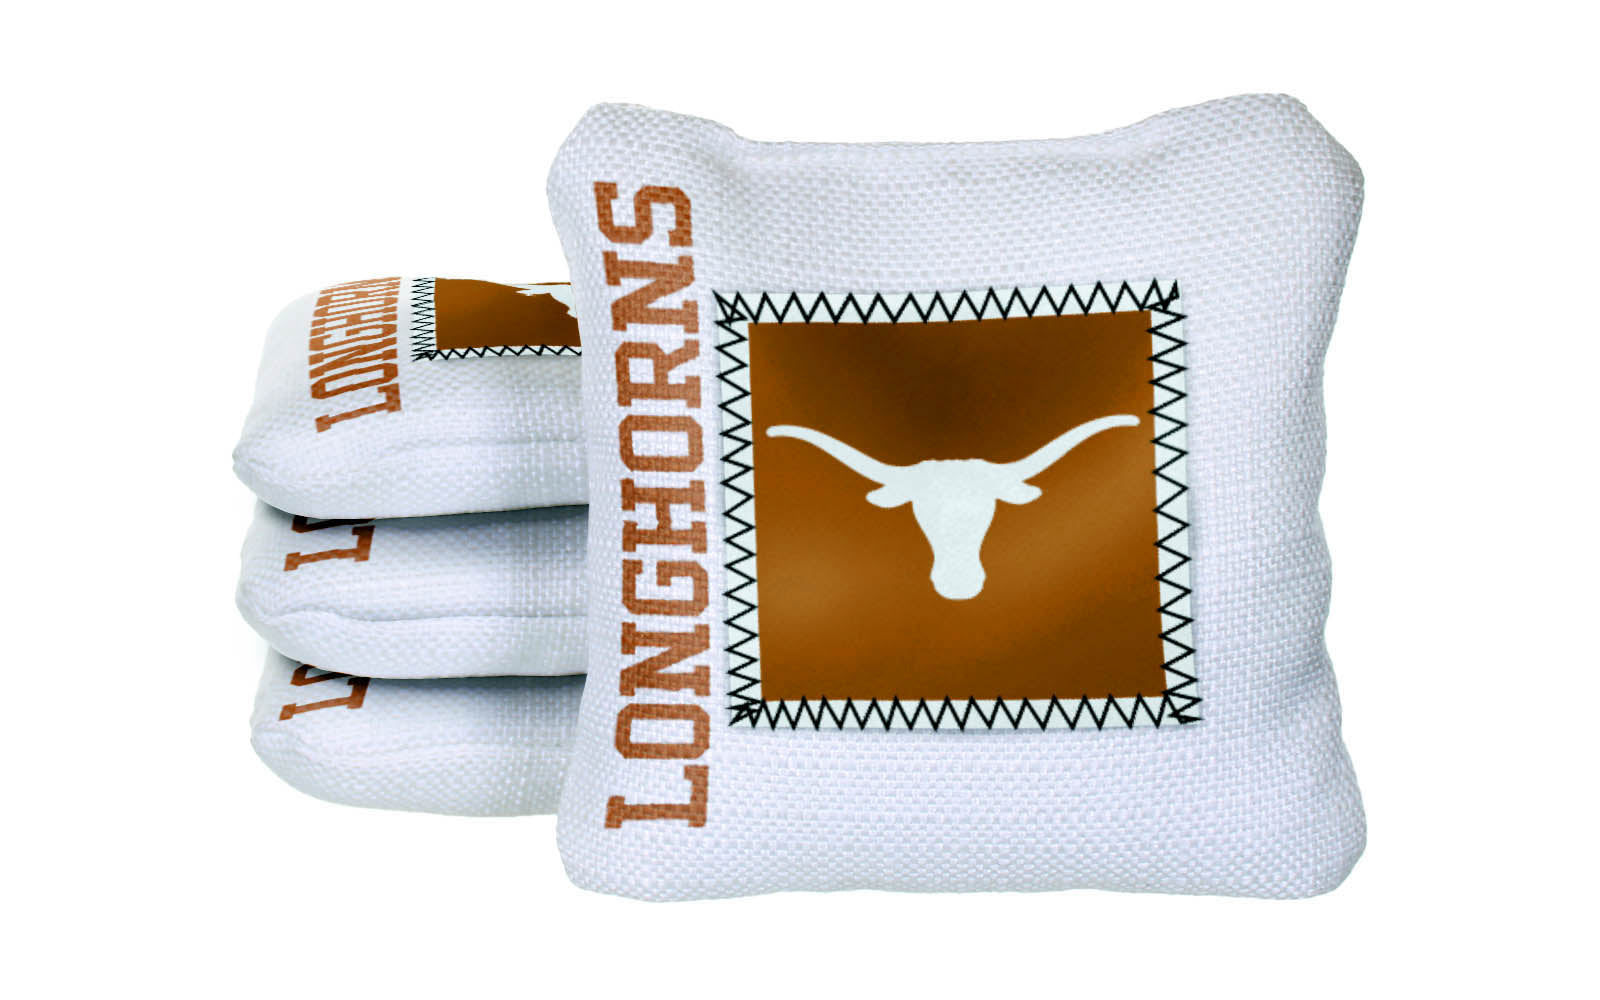 Officially Licensed Collegiate Cornhole Bags - AllCornhole Game Changers Steady 2.0 - Set of 4 - University of Texas at Austin